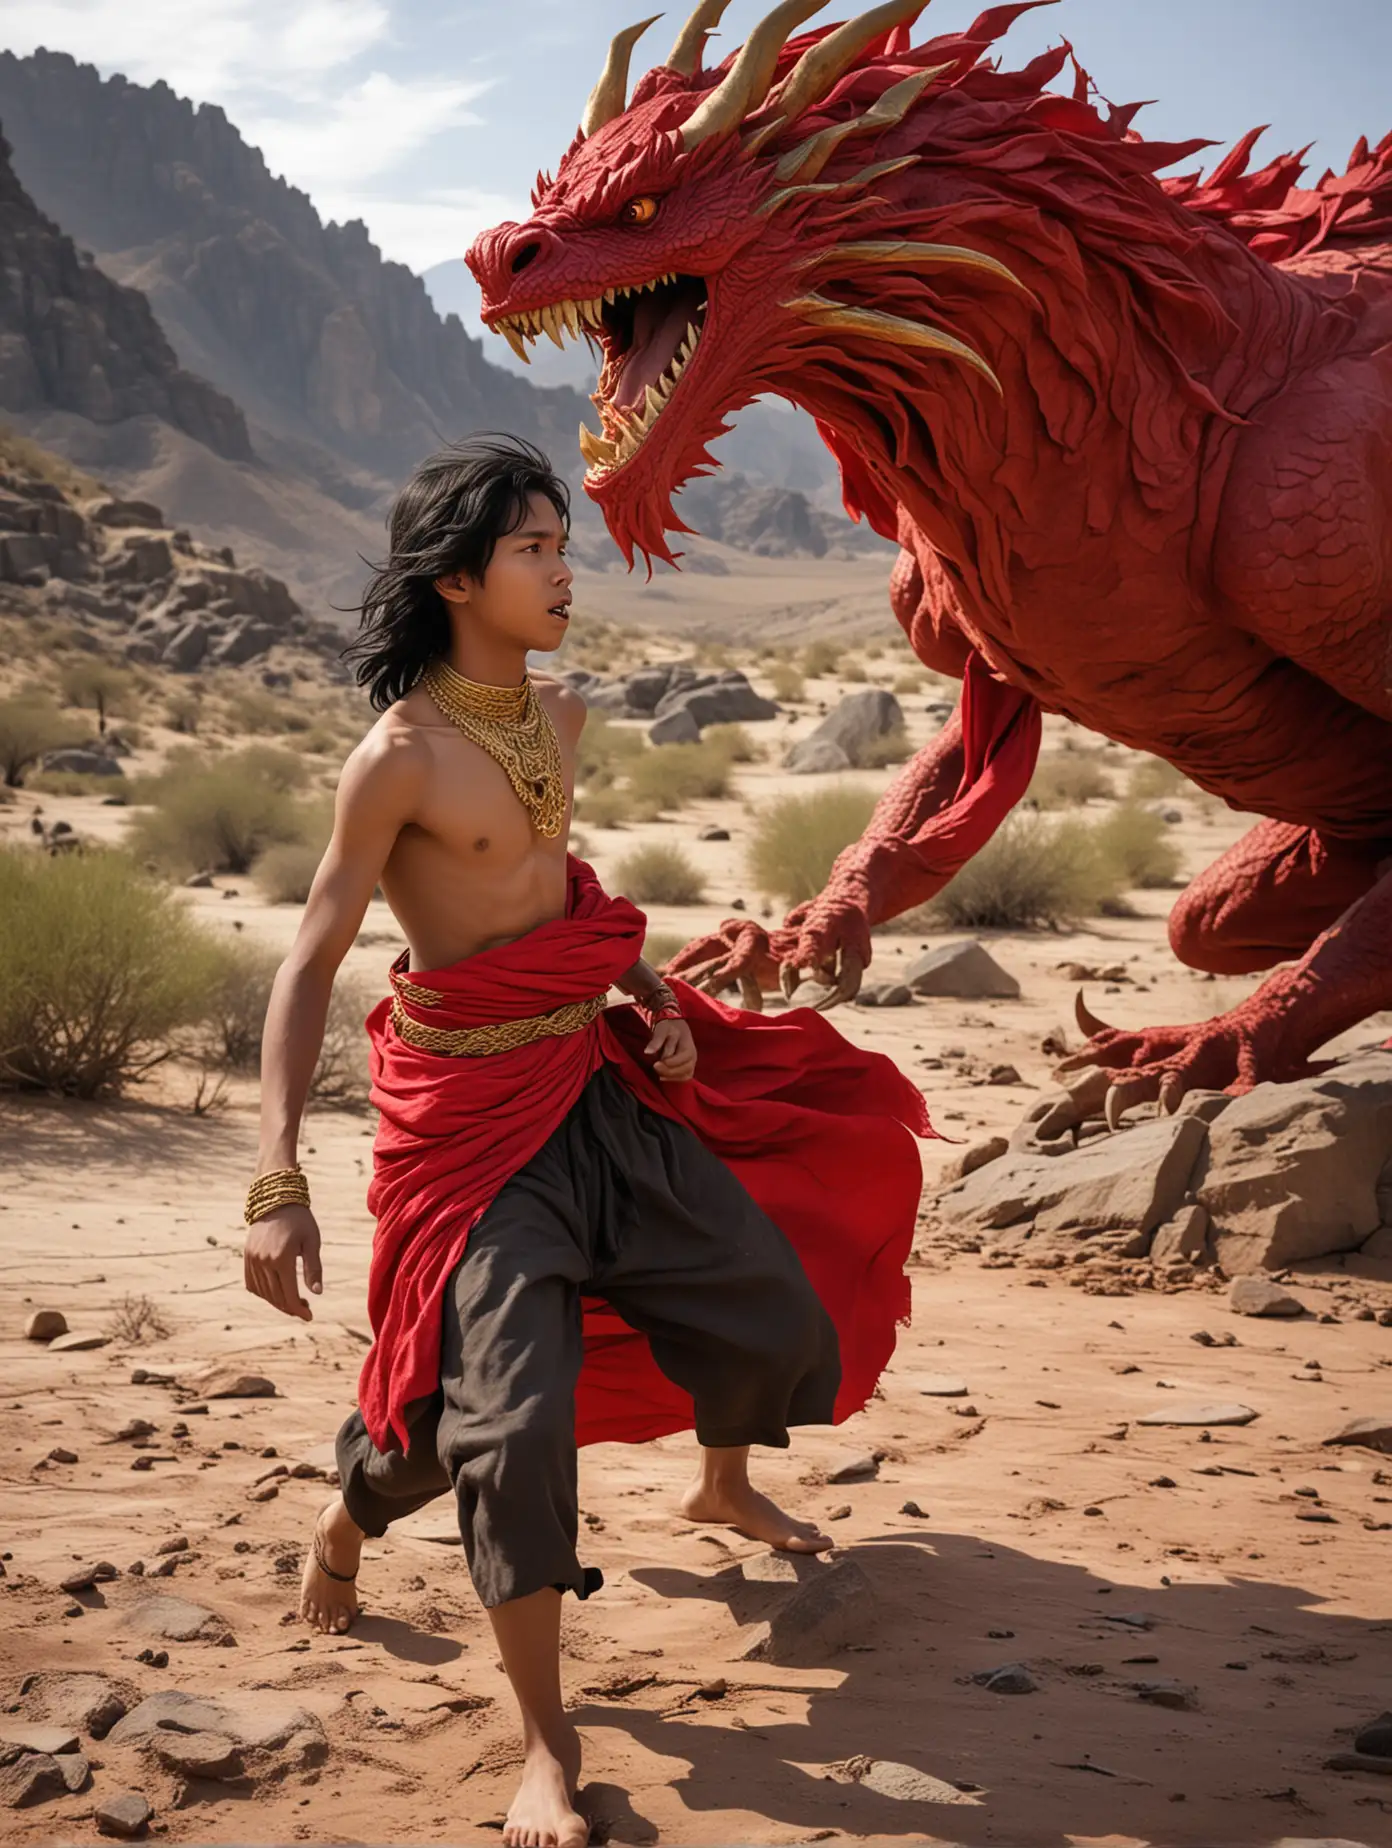 a 15 year old Indonesian boy with a bare chest, long wavy black hair, very dark skin color, wearing red cloth and gold jewelry fighting with a giant red-colored dragon in a desert rock field at the base of the mountain